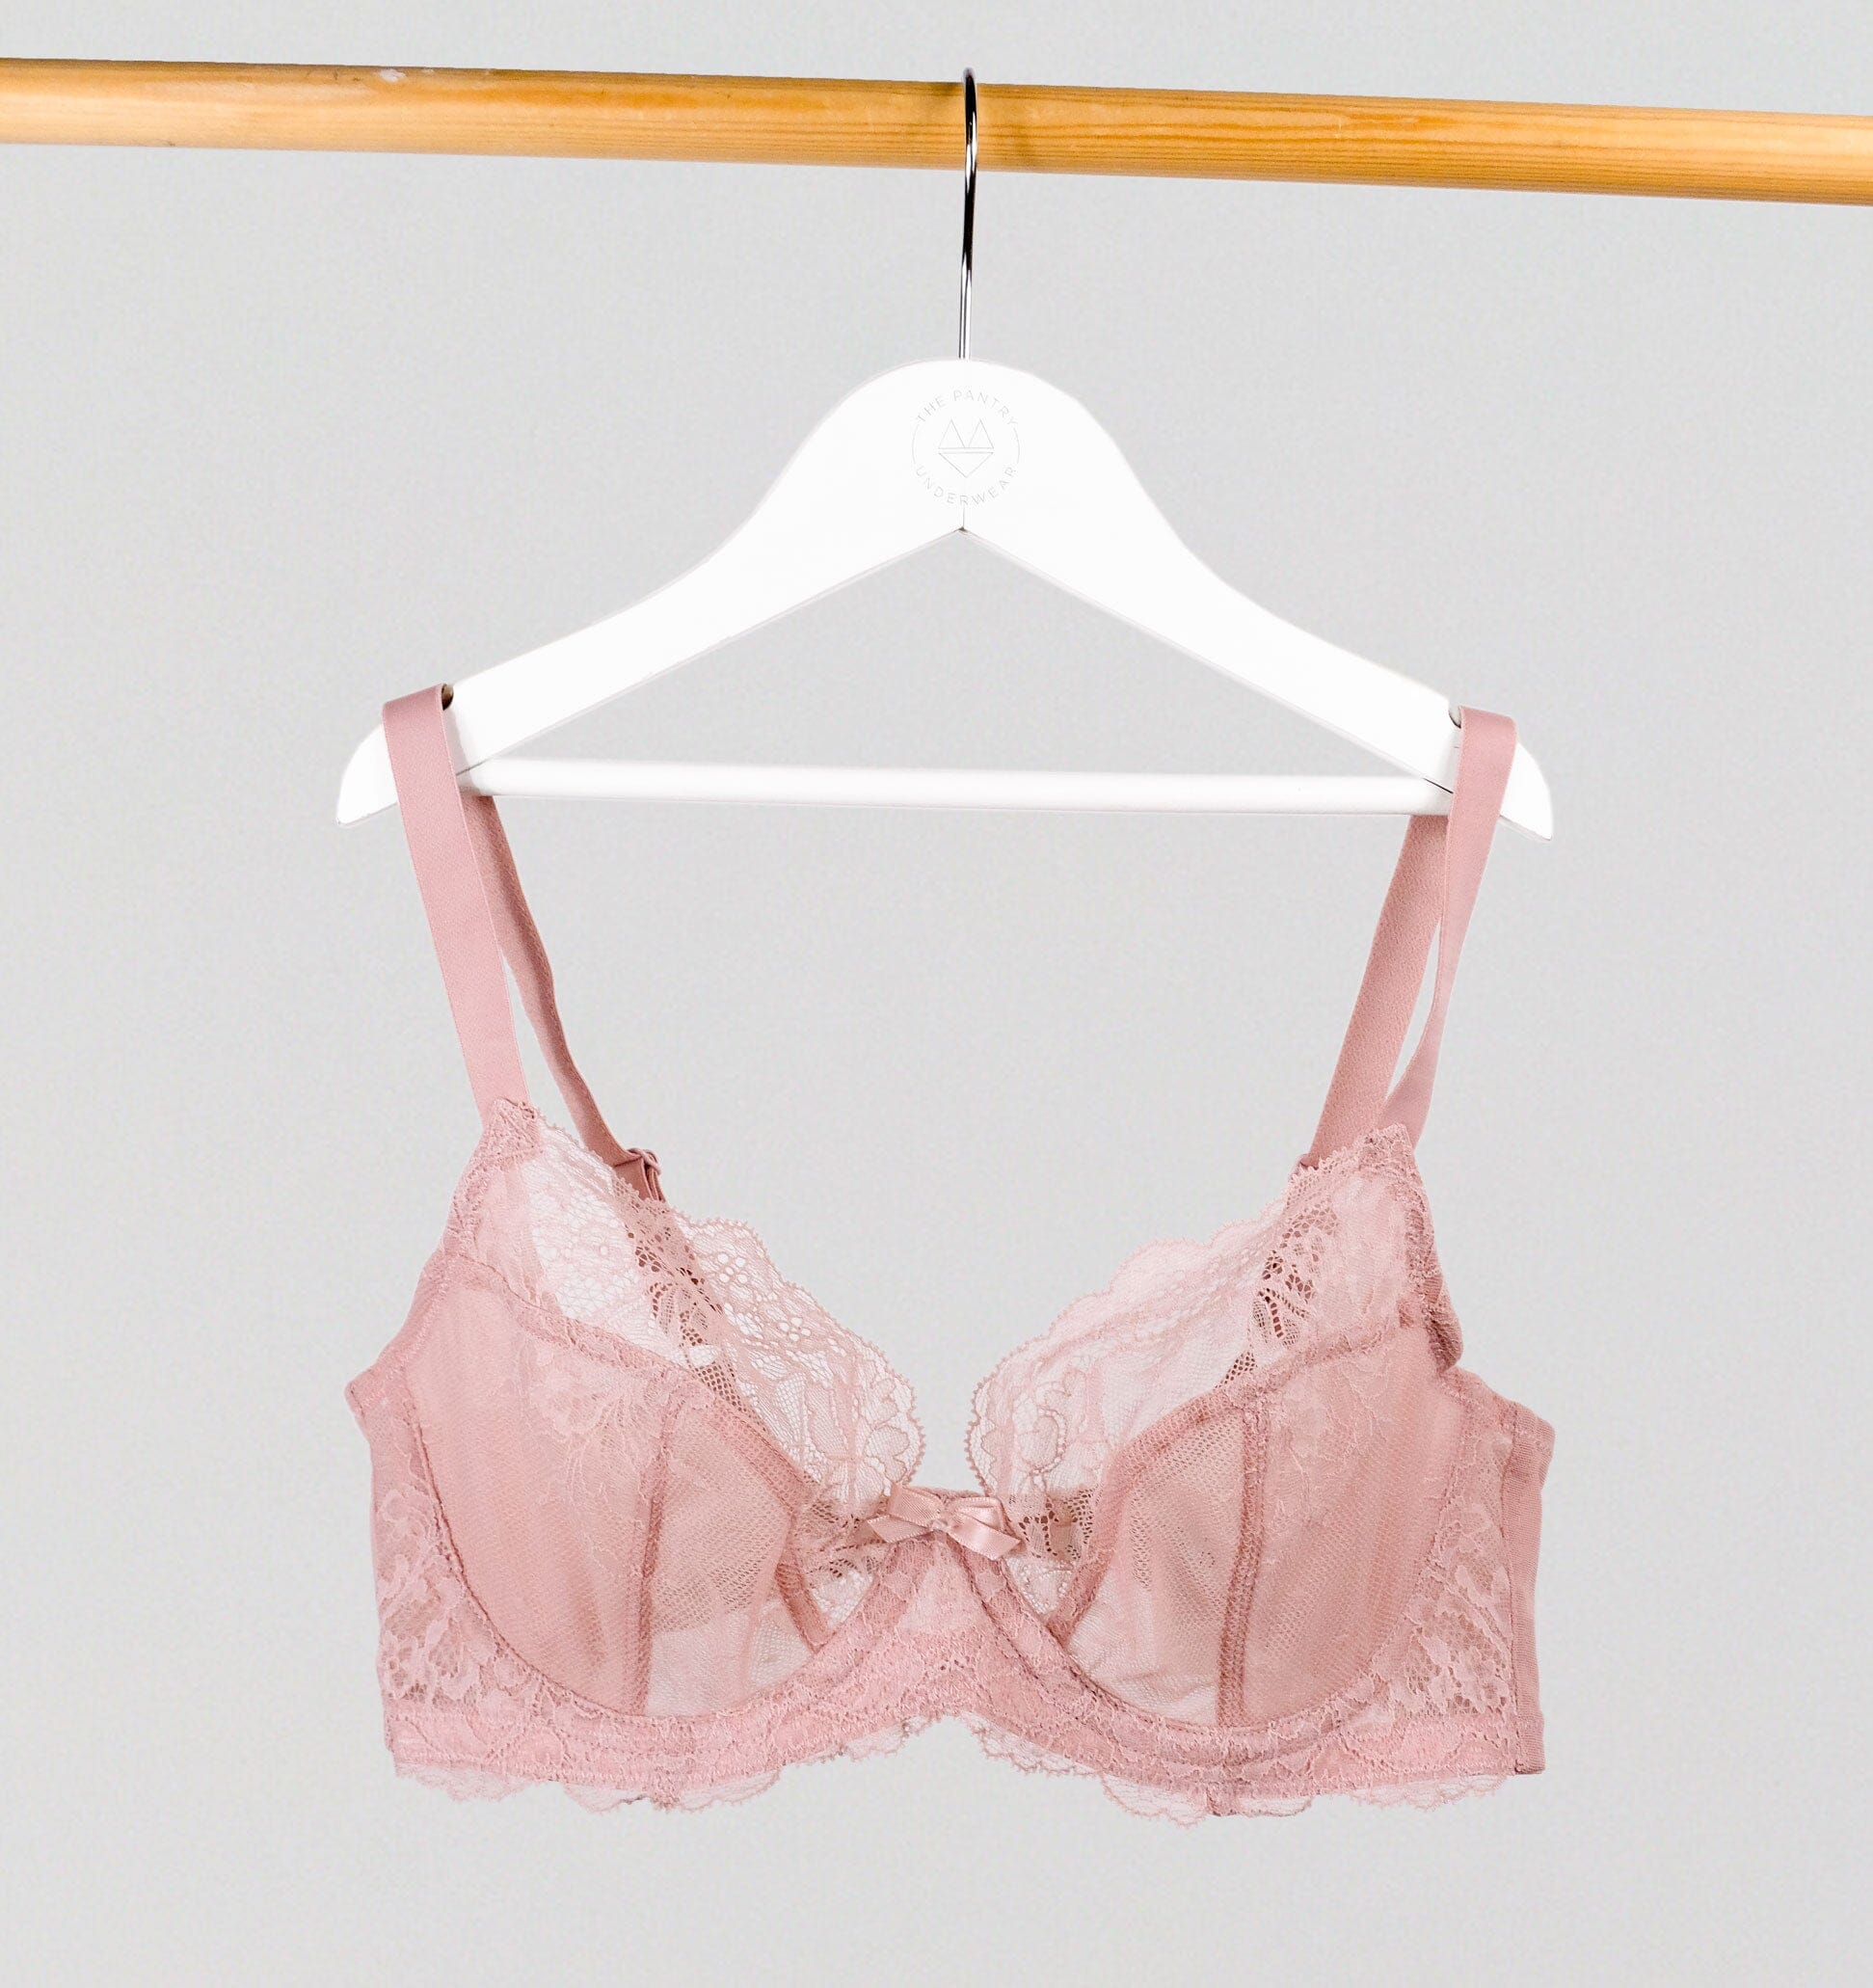 Bra Bandeau Top Lingerie Peach Melba Abricot // Undies Bra in Playful Rose  French Lace Handmade of Fransik 